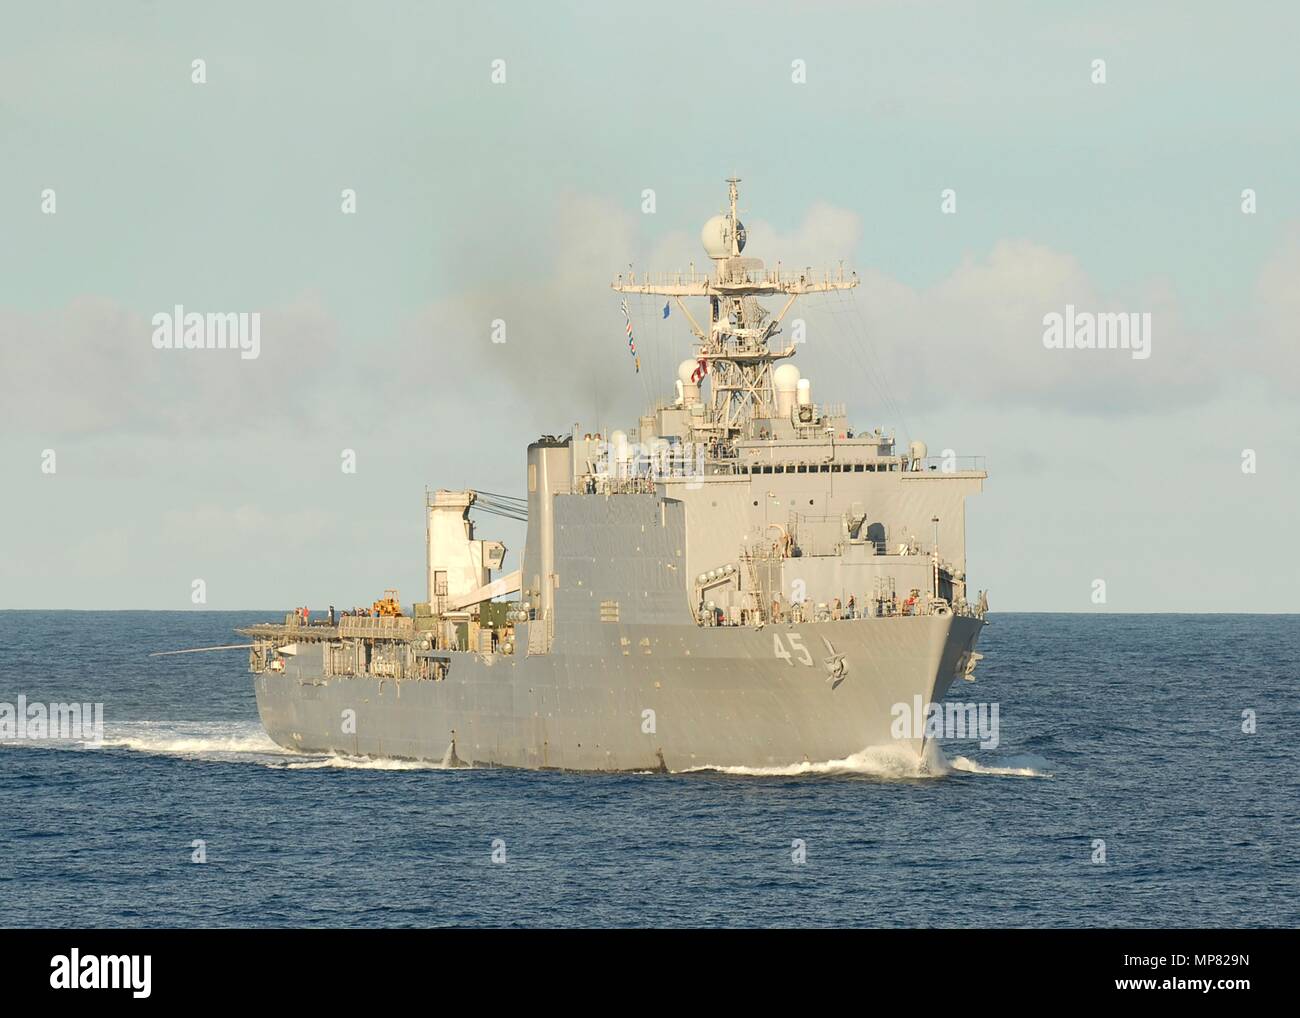 The U.S. Navy Whidbey Island-class amphibious dock landing ship USS Comstock steams underway September 26, 2011 in the Pacific Ocean.   (photo by Larry S. Carlson via Planetpix) Stock Photo